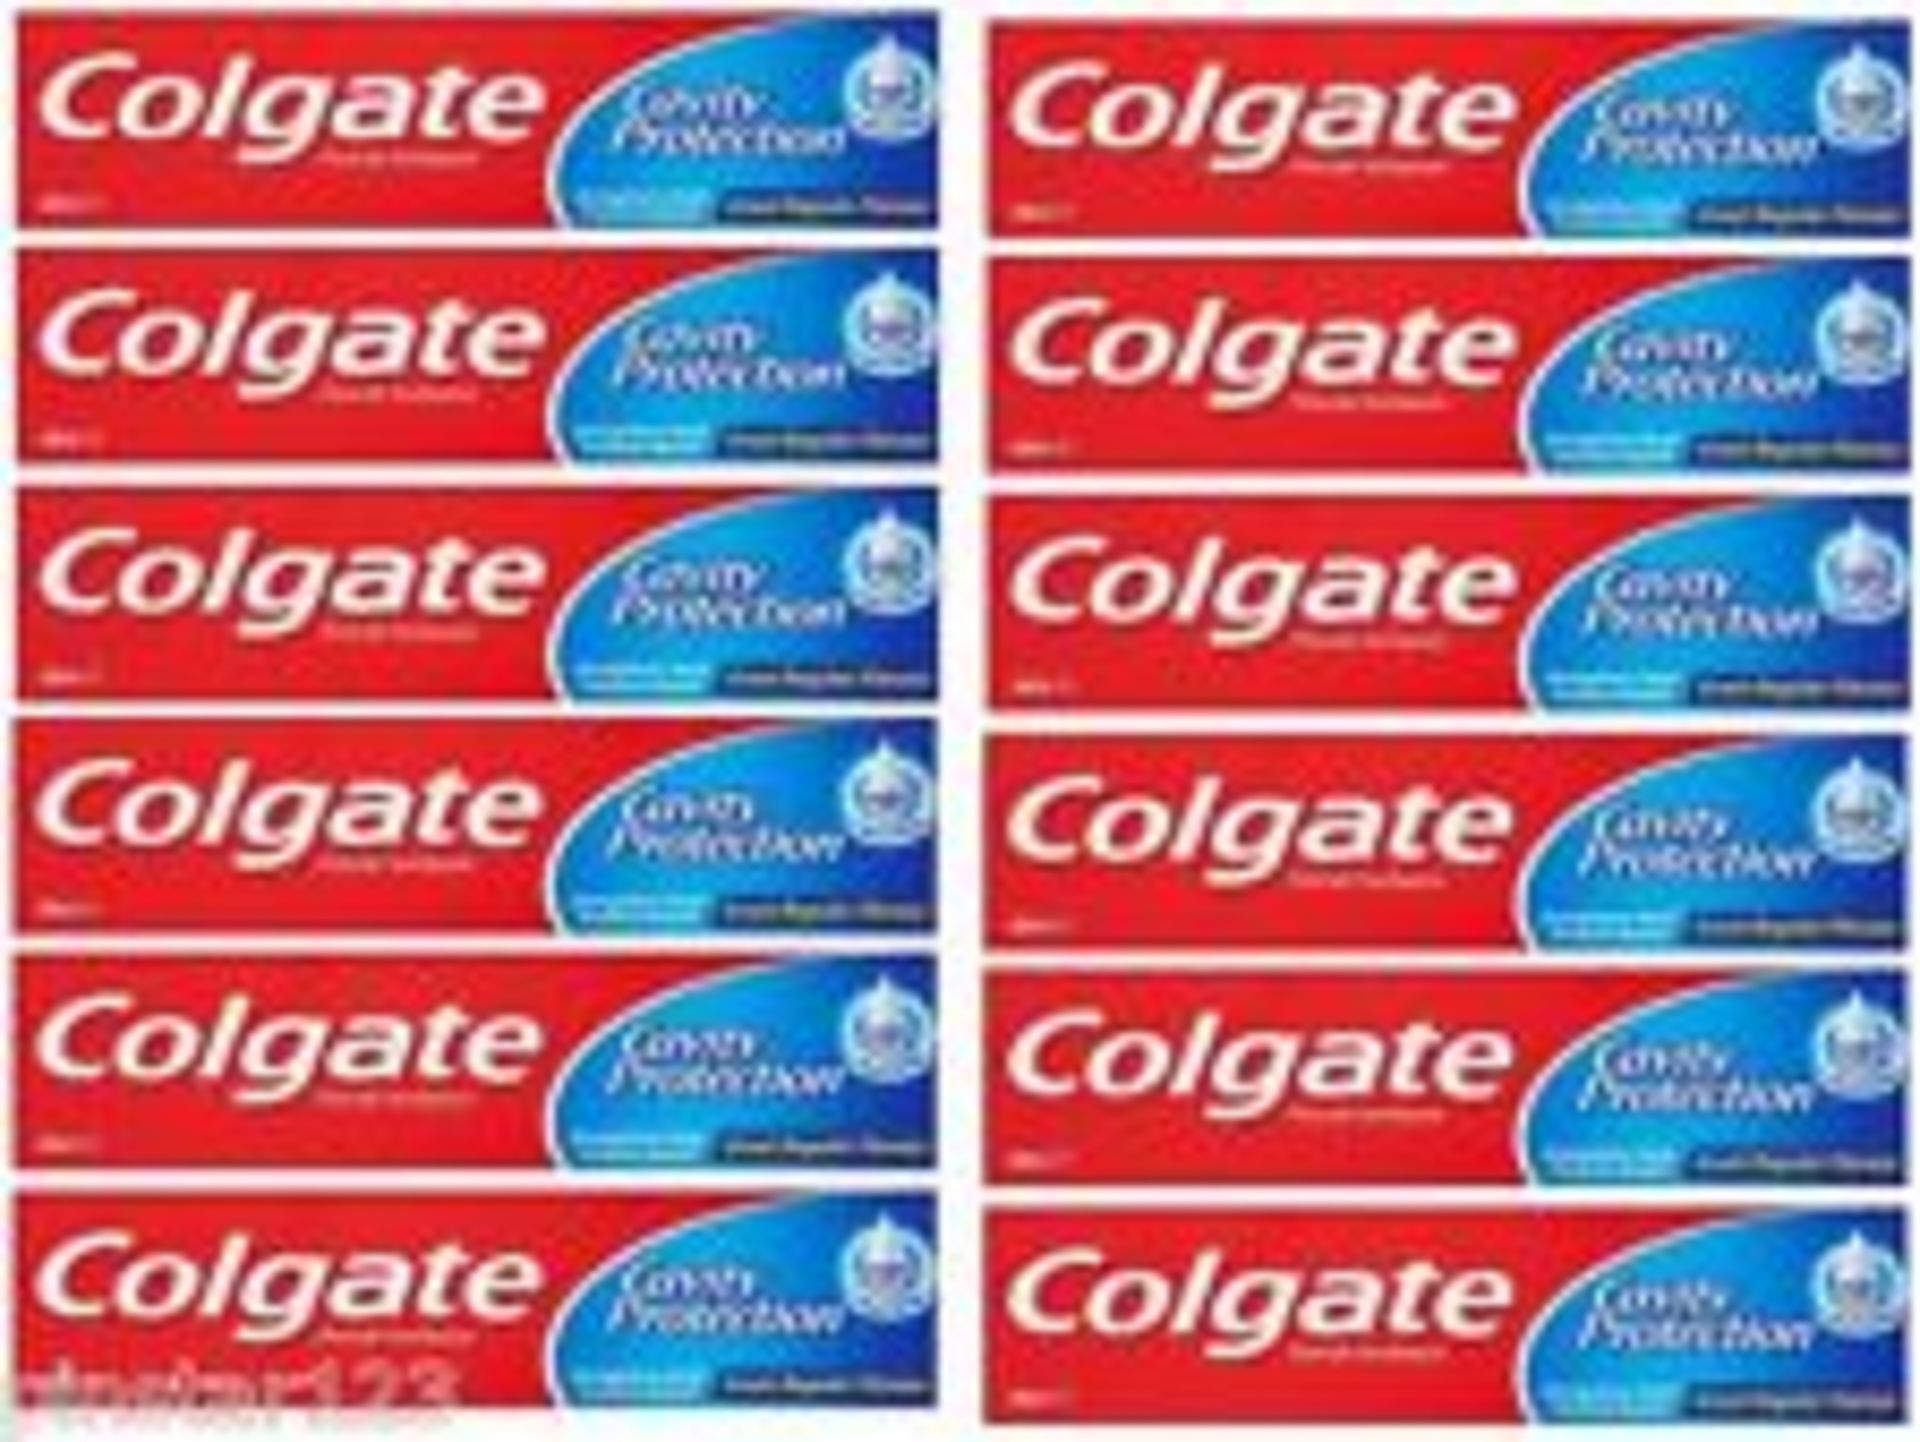 V Brand New 12 x Colgate Toothpaste Deep Clean Whitening 100ml Total Superdrug Price £12.38 X 2 YOUR